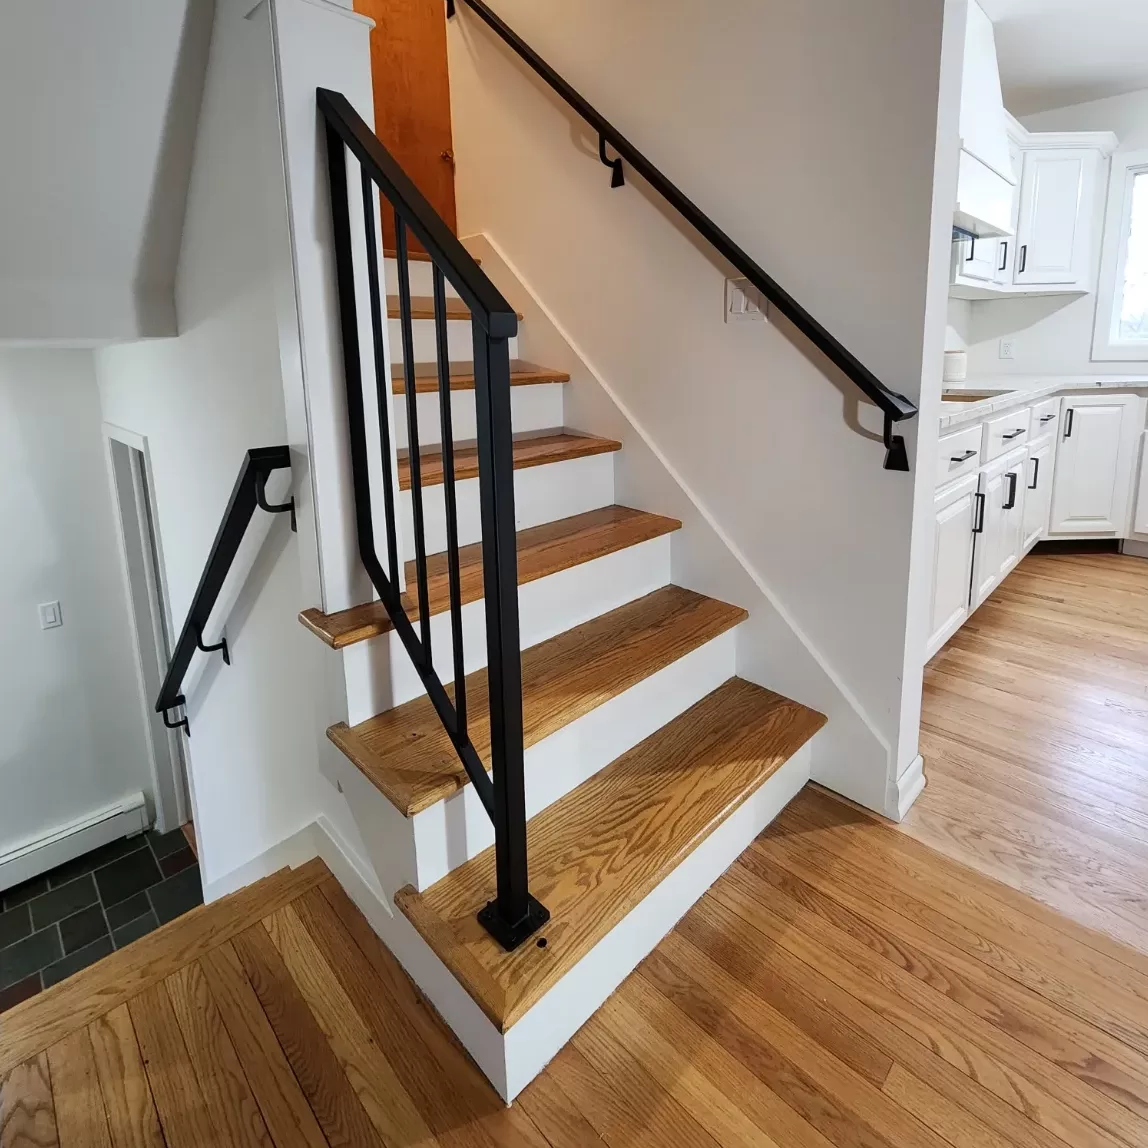 Home's interior wooden staircase with black metal railing